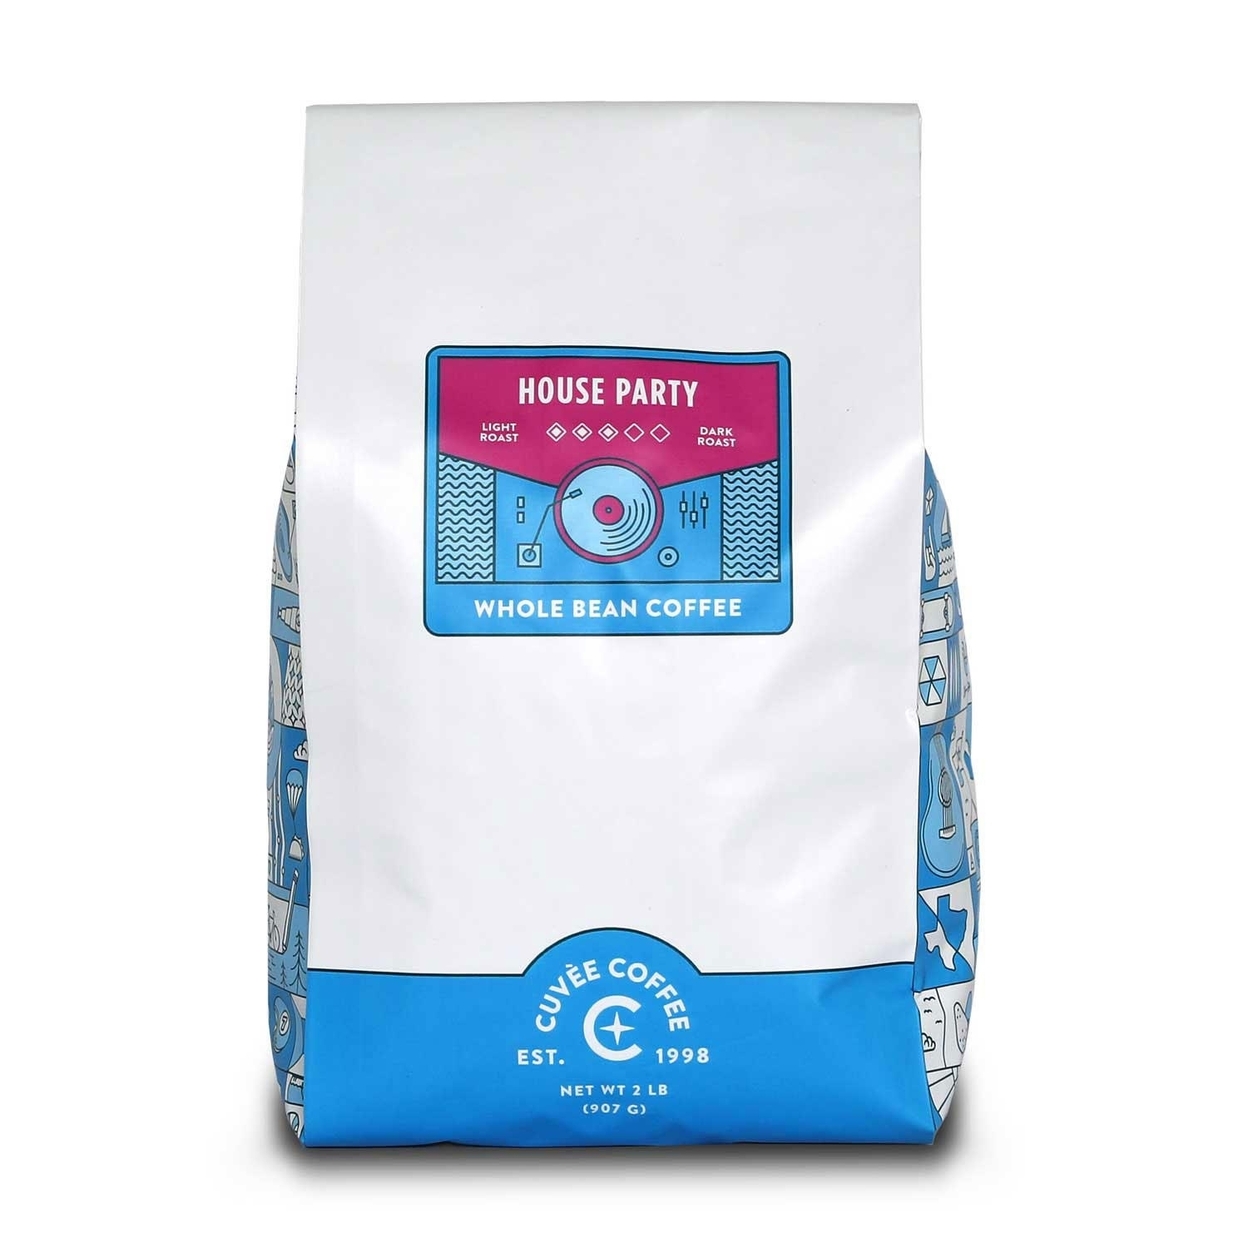 Cuvee Whole Bean Coffee, House Party Blend (32 Ounce)